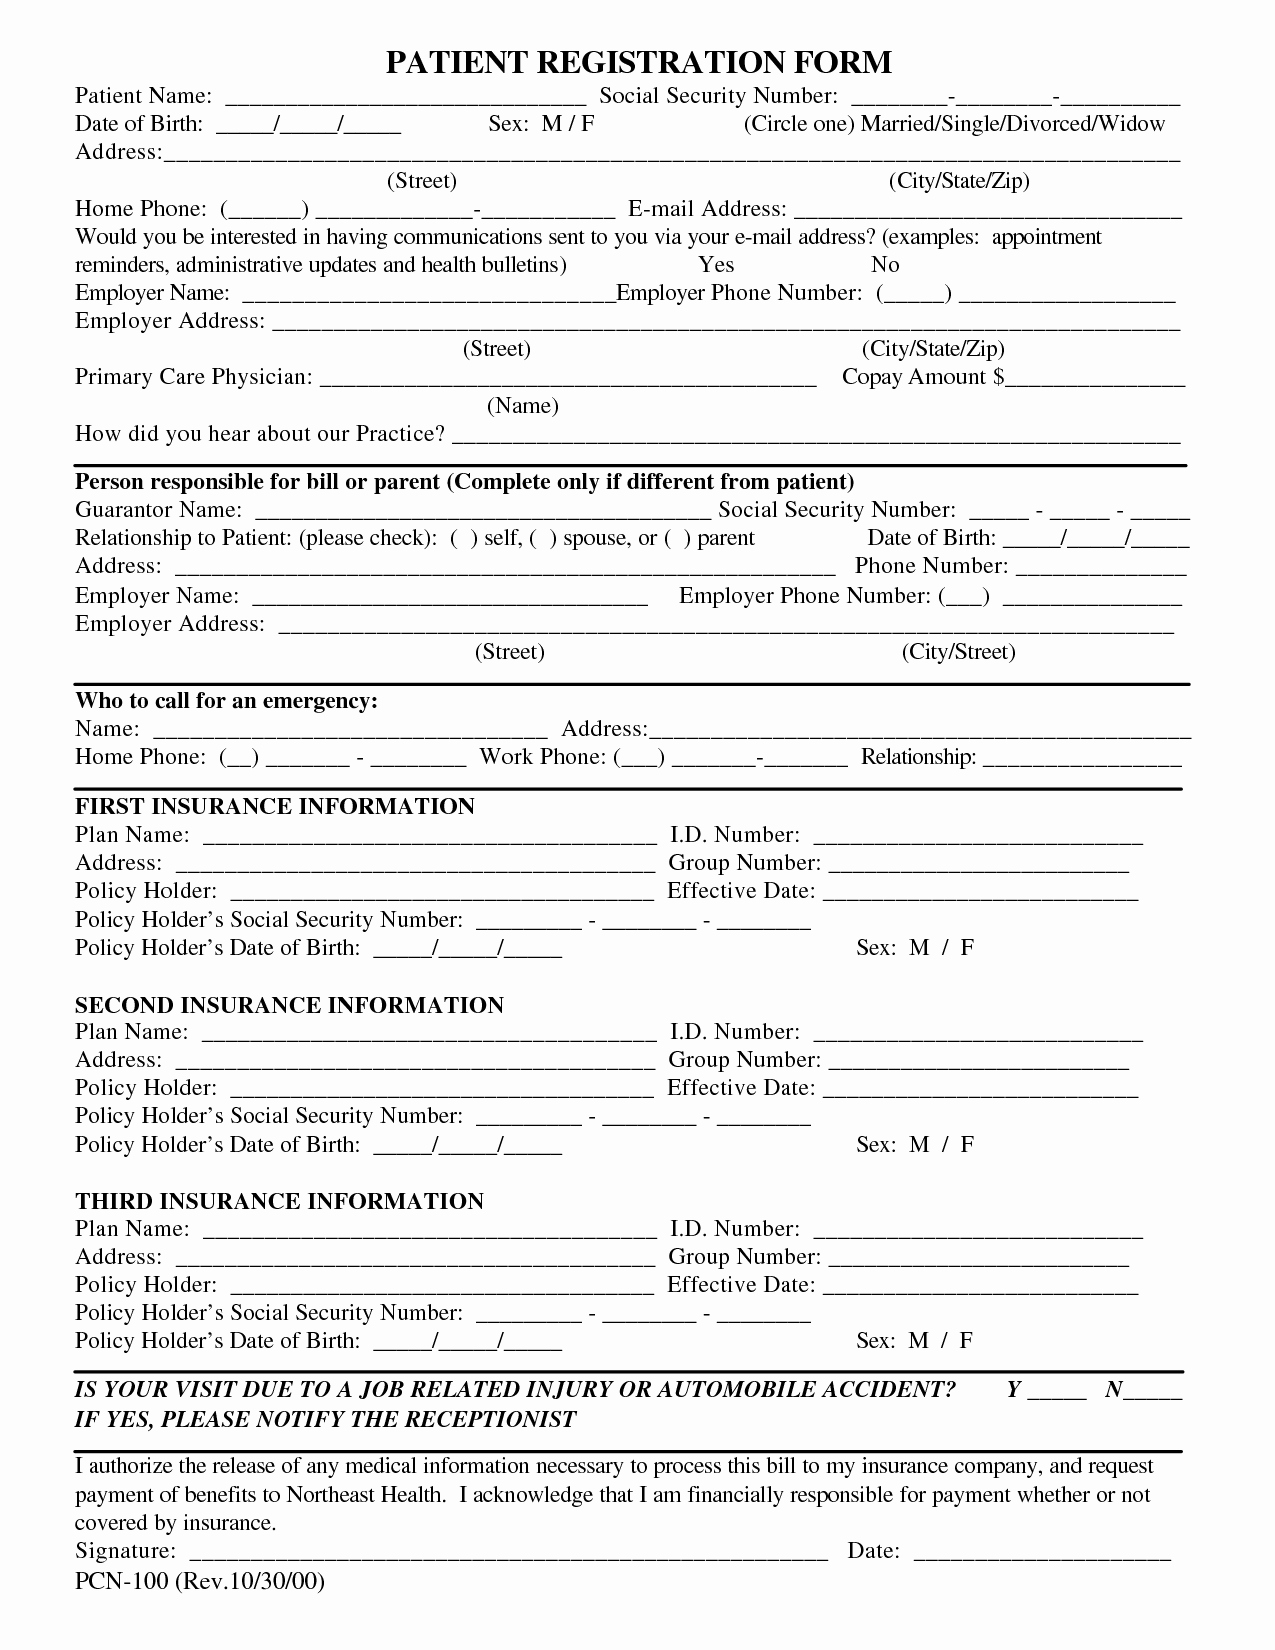 Patient Discharge form Template Awesome Free Patient Registration form Template